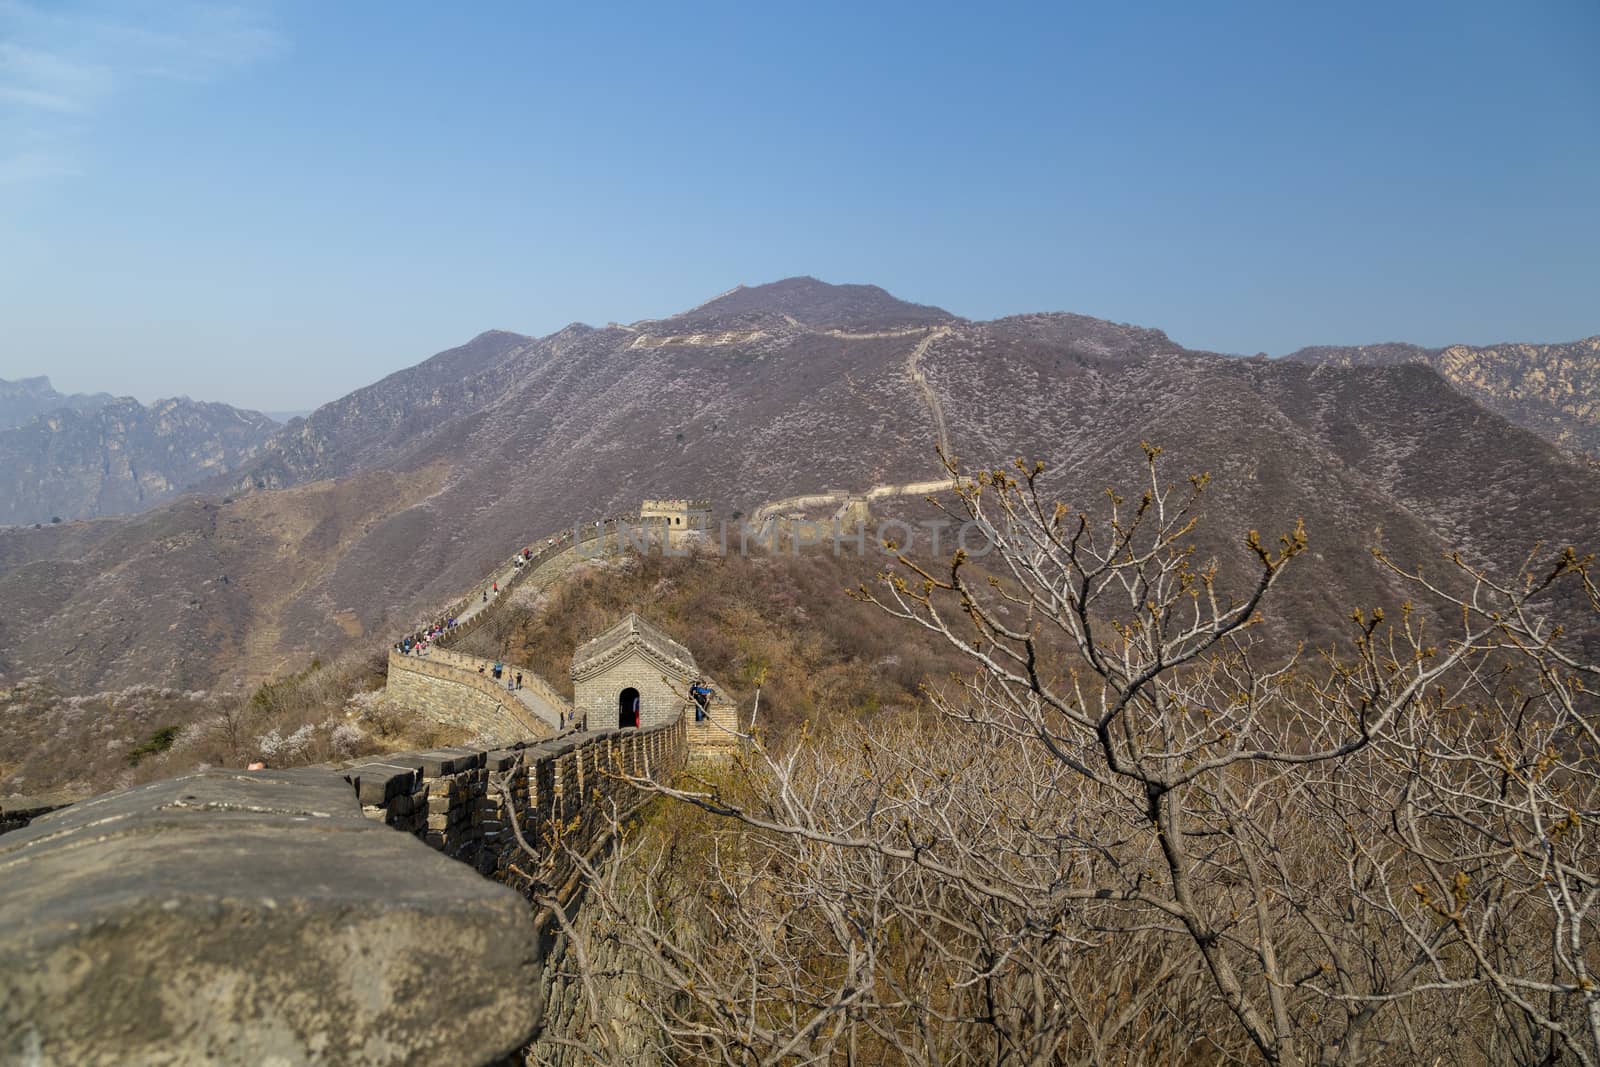 Beijing, China - CIRCA 2020: Great Wall of China in a green forest landscape at Mutianyu in Huairou District near Beijing, China. Autumn view of Grate Wall of China by dugulan